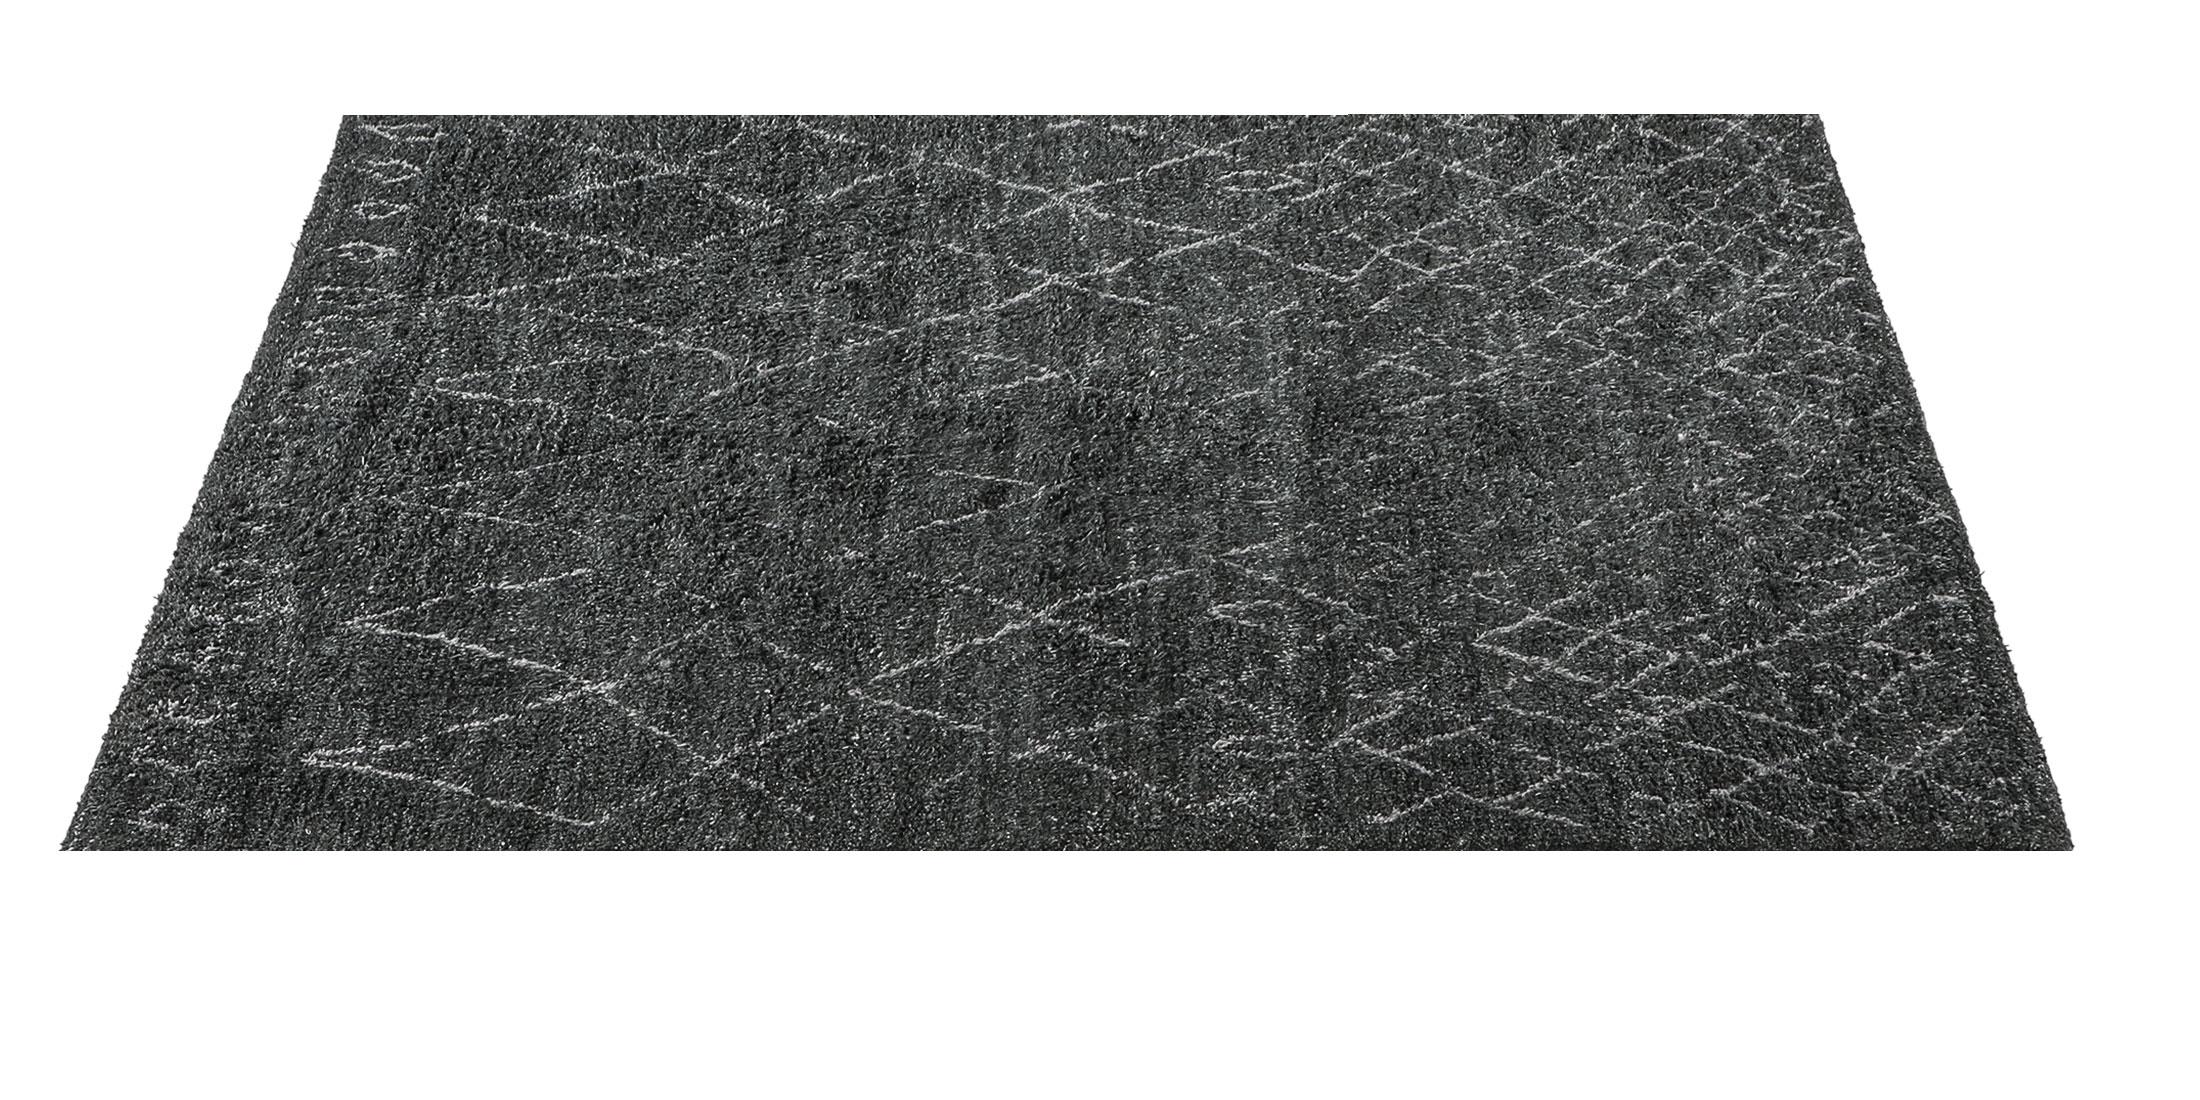 For Sale: Black (Graphite/Charcoal) Ben Soleimani Performance Elda Rug– Moroccan Hand-knotted Charcoal 9'x12' 2